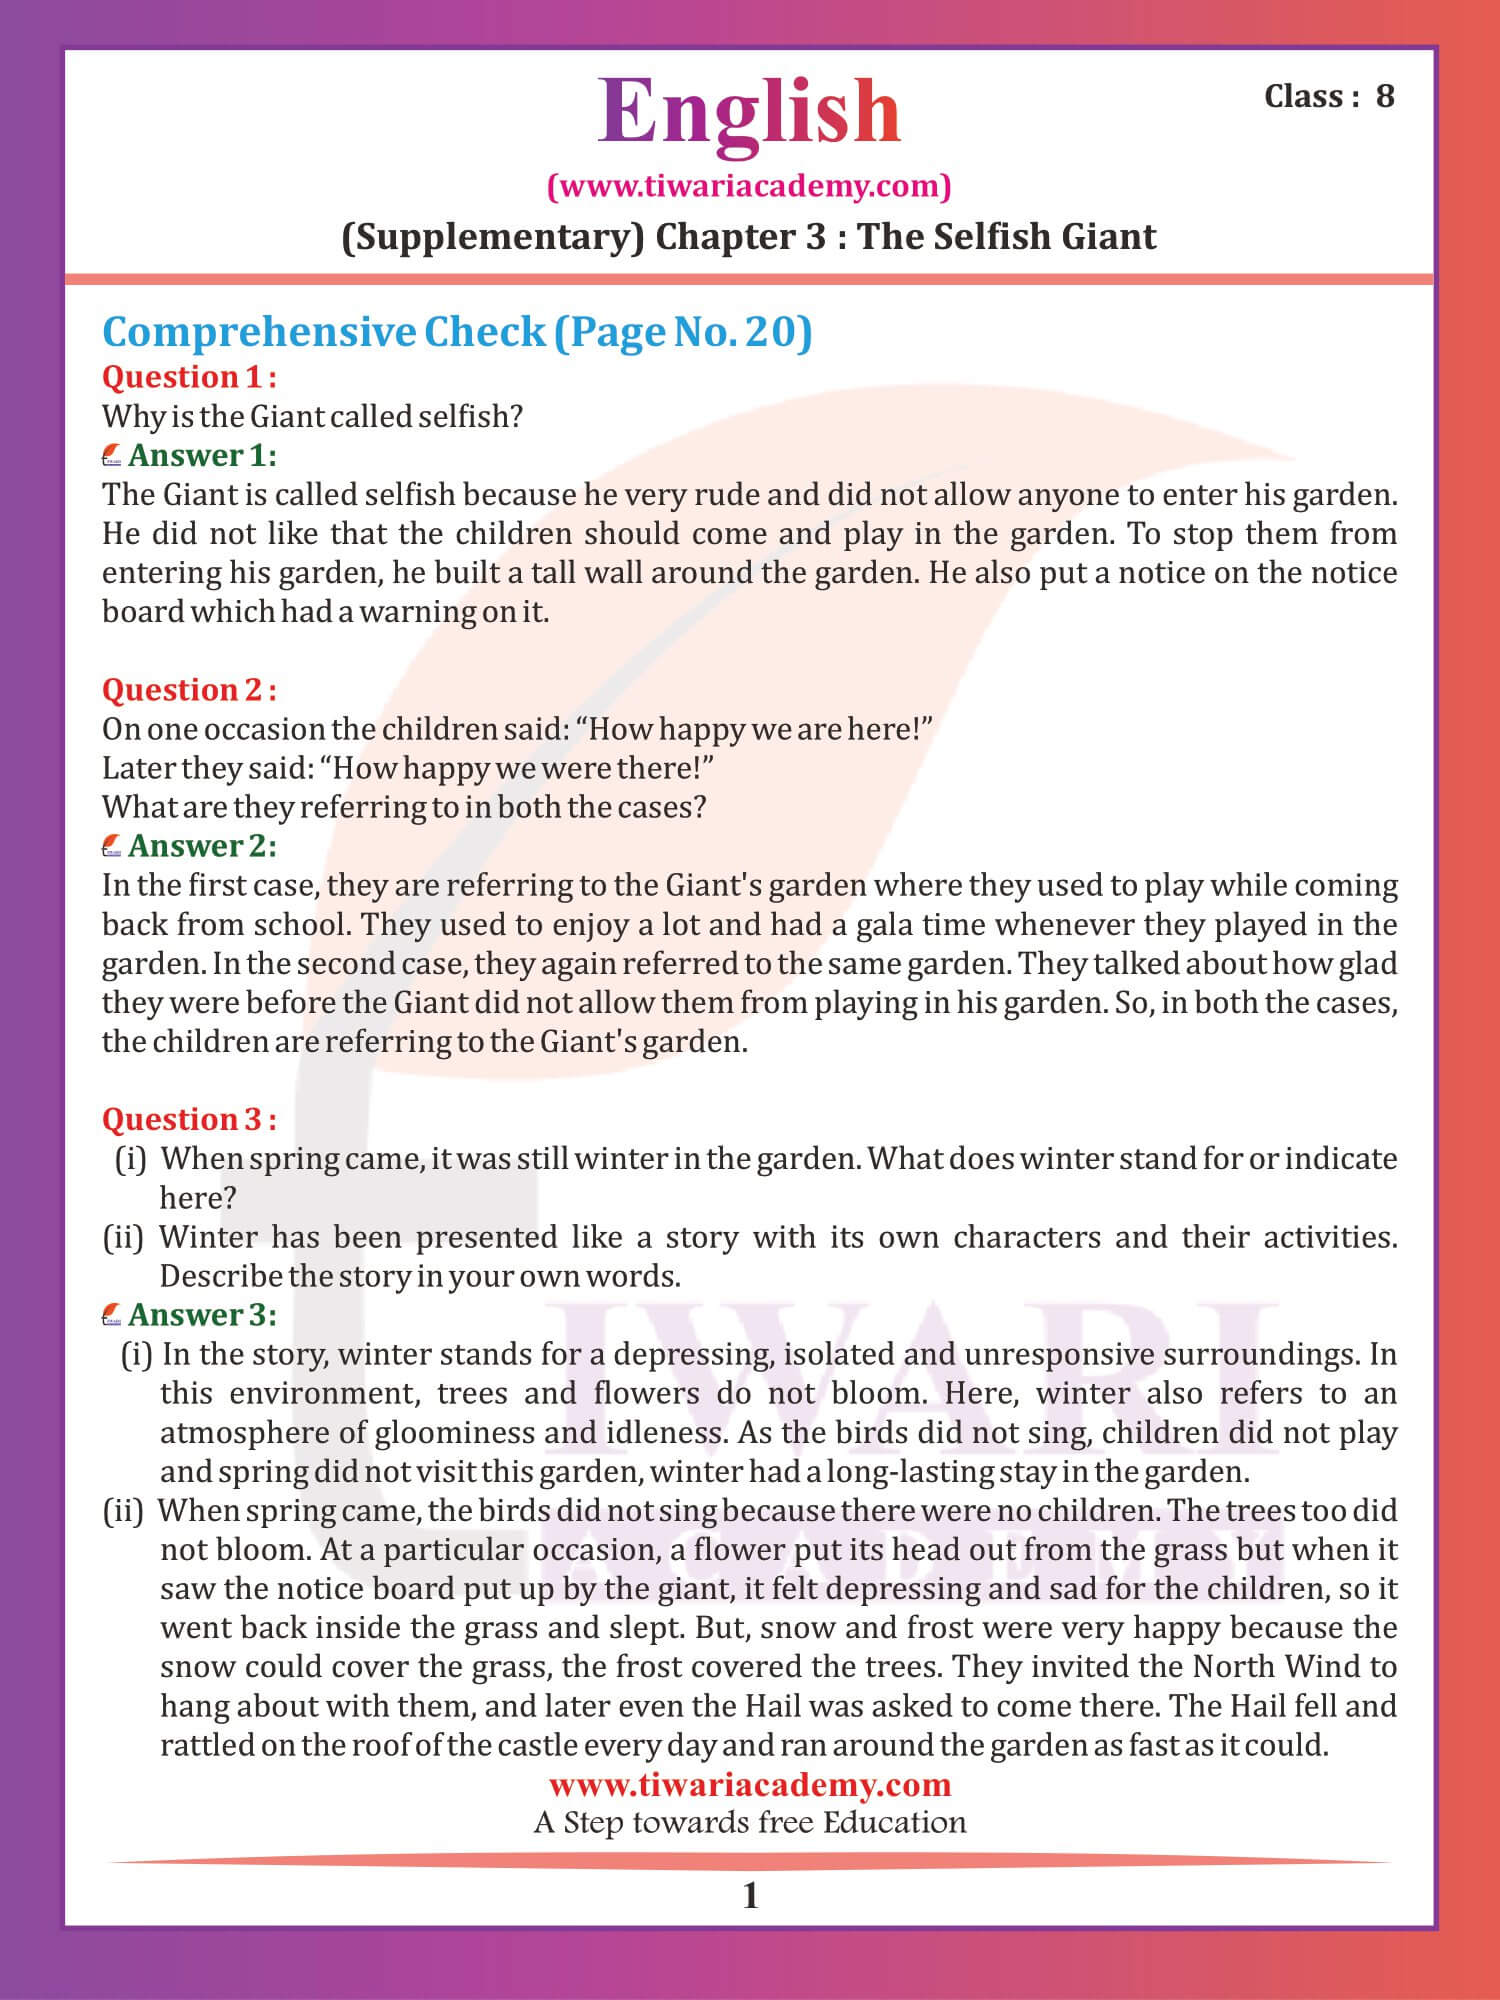 NCERT Solutions for Class 8 English Supplementary Chapter 3 The Selfish Giant